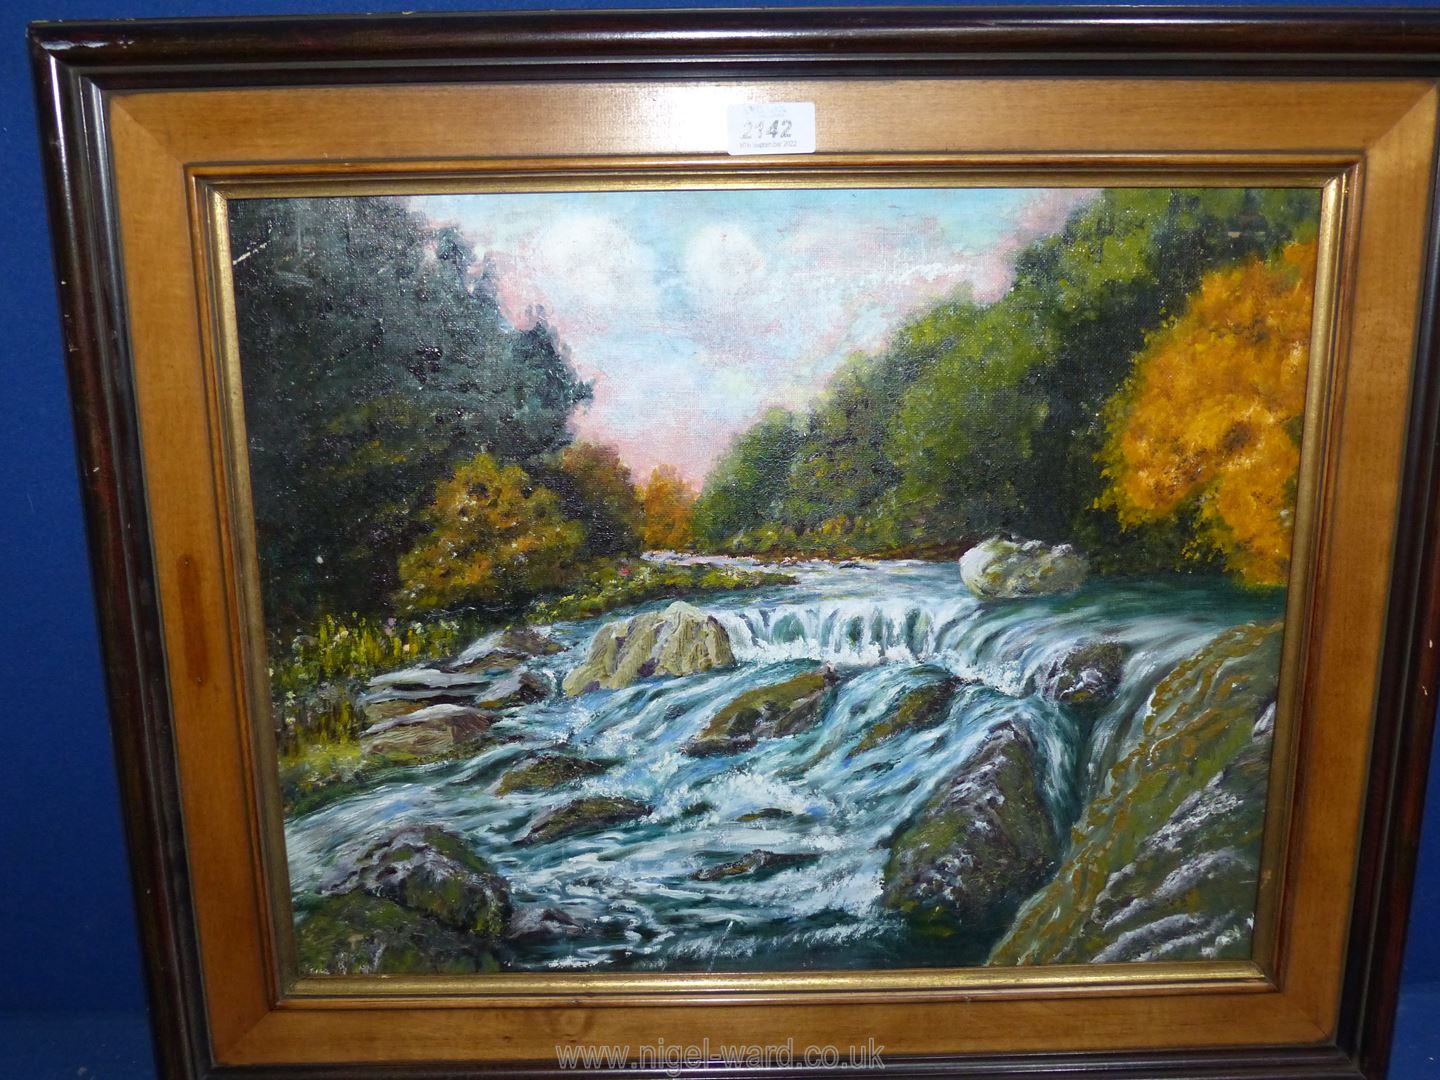 An Oil on canvas of a Boulder strewn river.